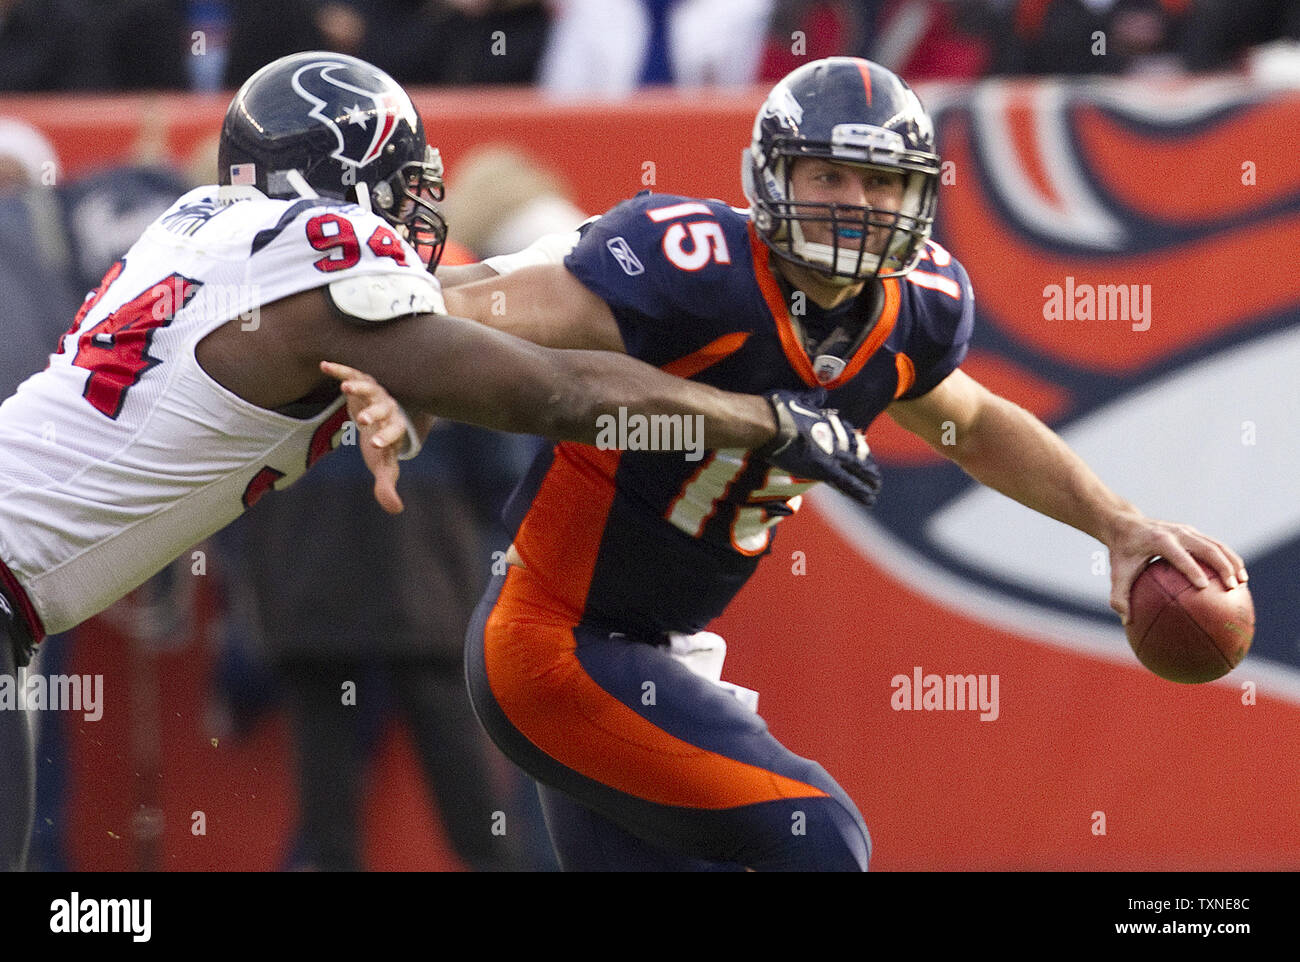 Denver Broncos rookie quarterback Tim Tebow escapes from Houston Texans defensive end Antonio Smith during the first half at Invesco Field at Mile High on December 26, 2010 in Denver.         UPI/Gary C. Caskey Stock Photo